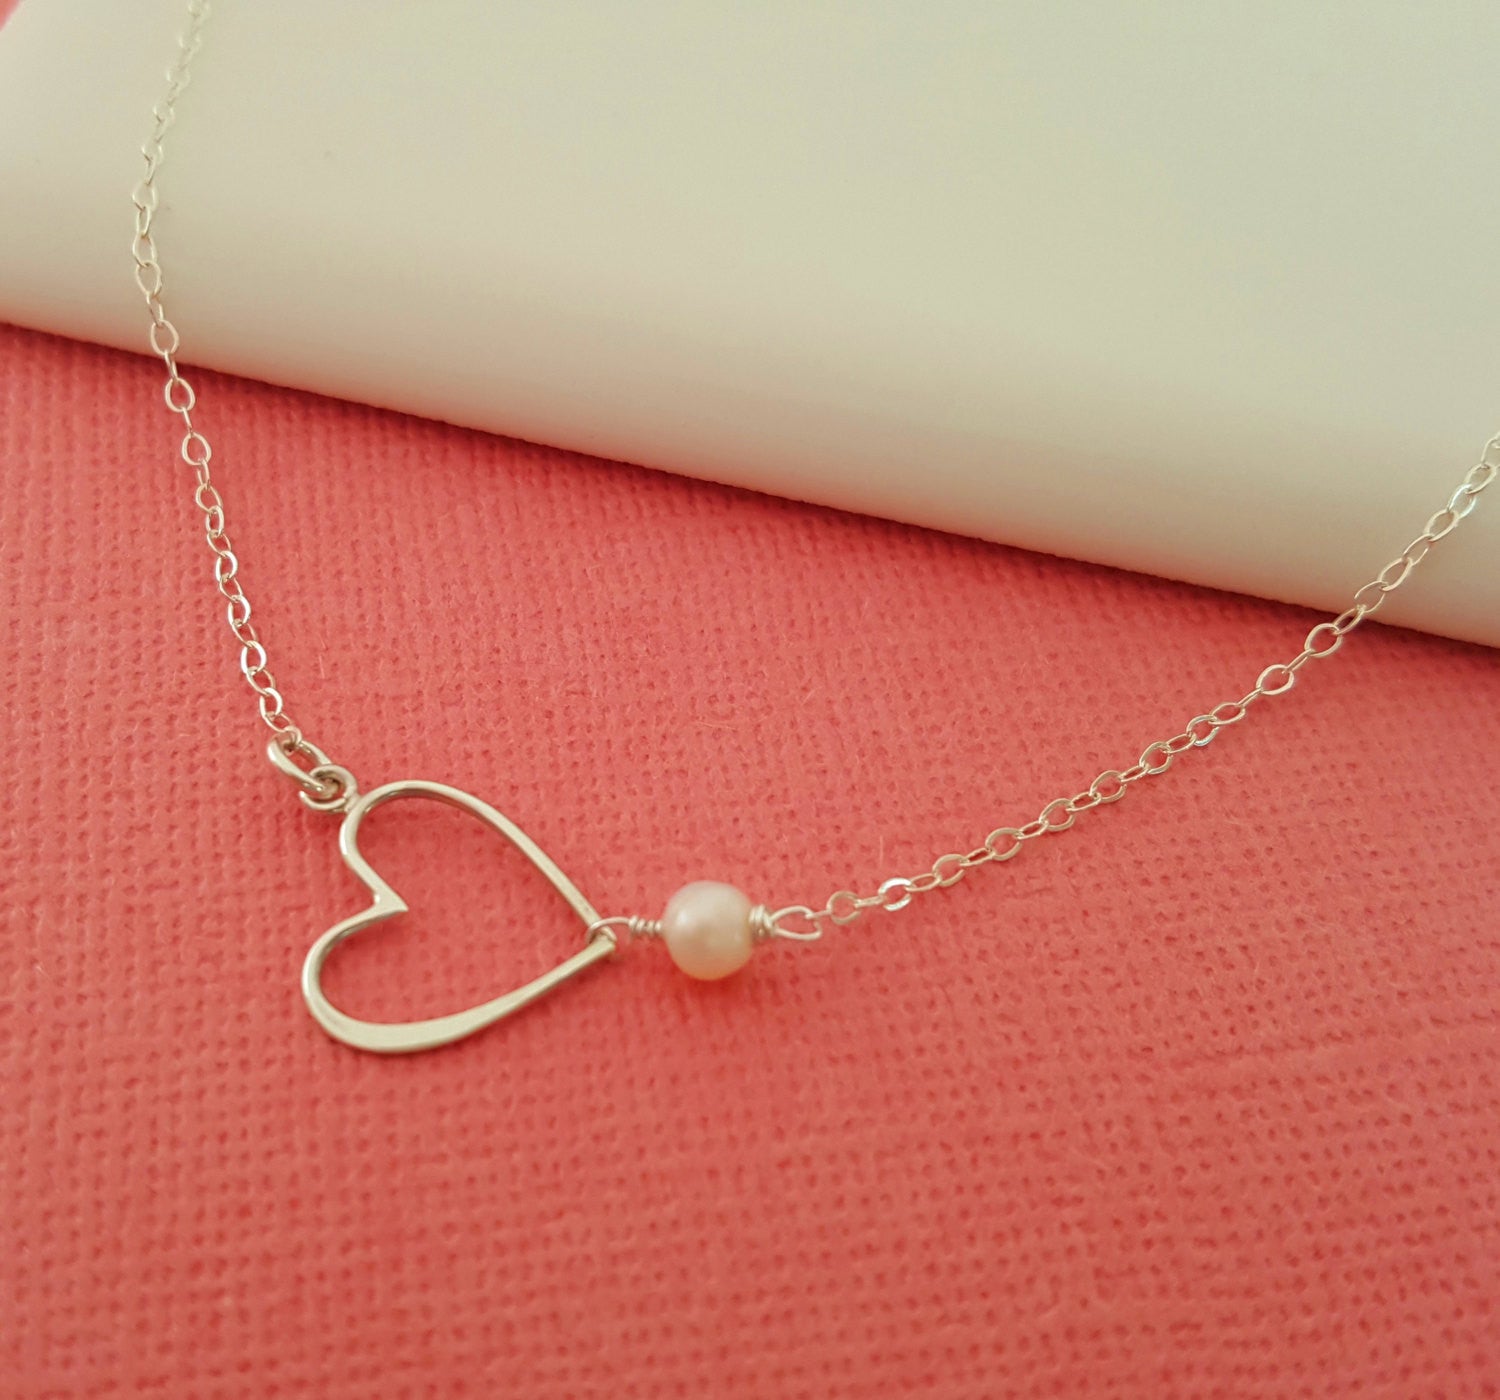 Personalized Sideways Heart Necklace – The Little Shop of Jewels